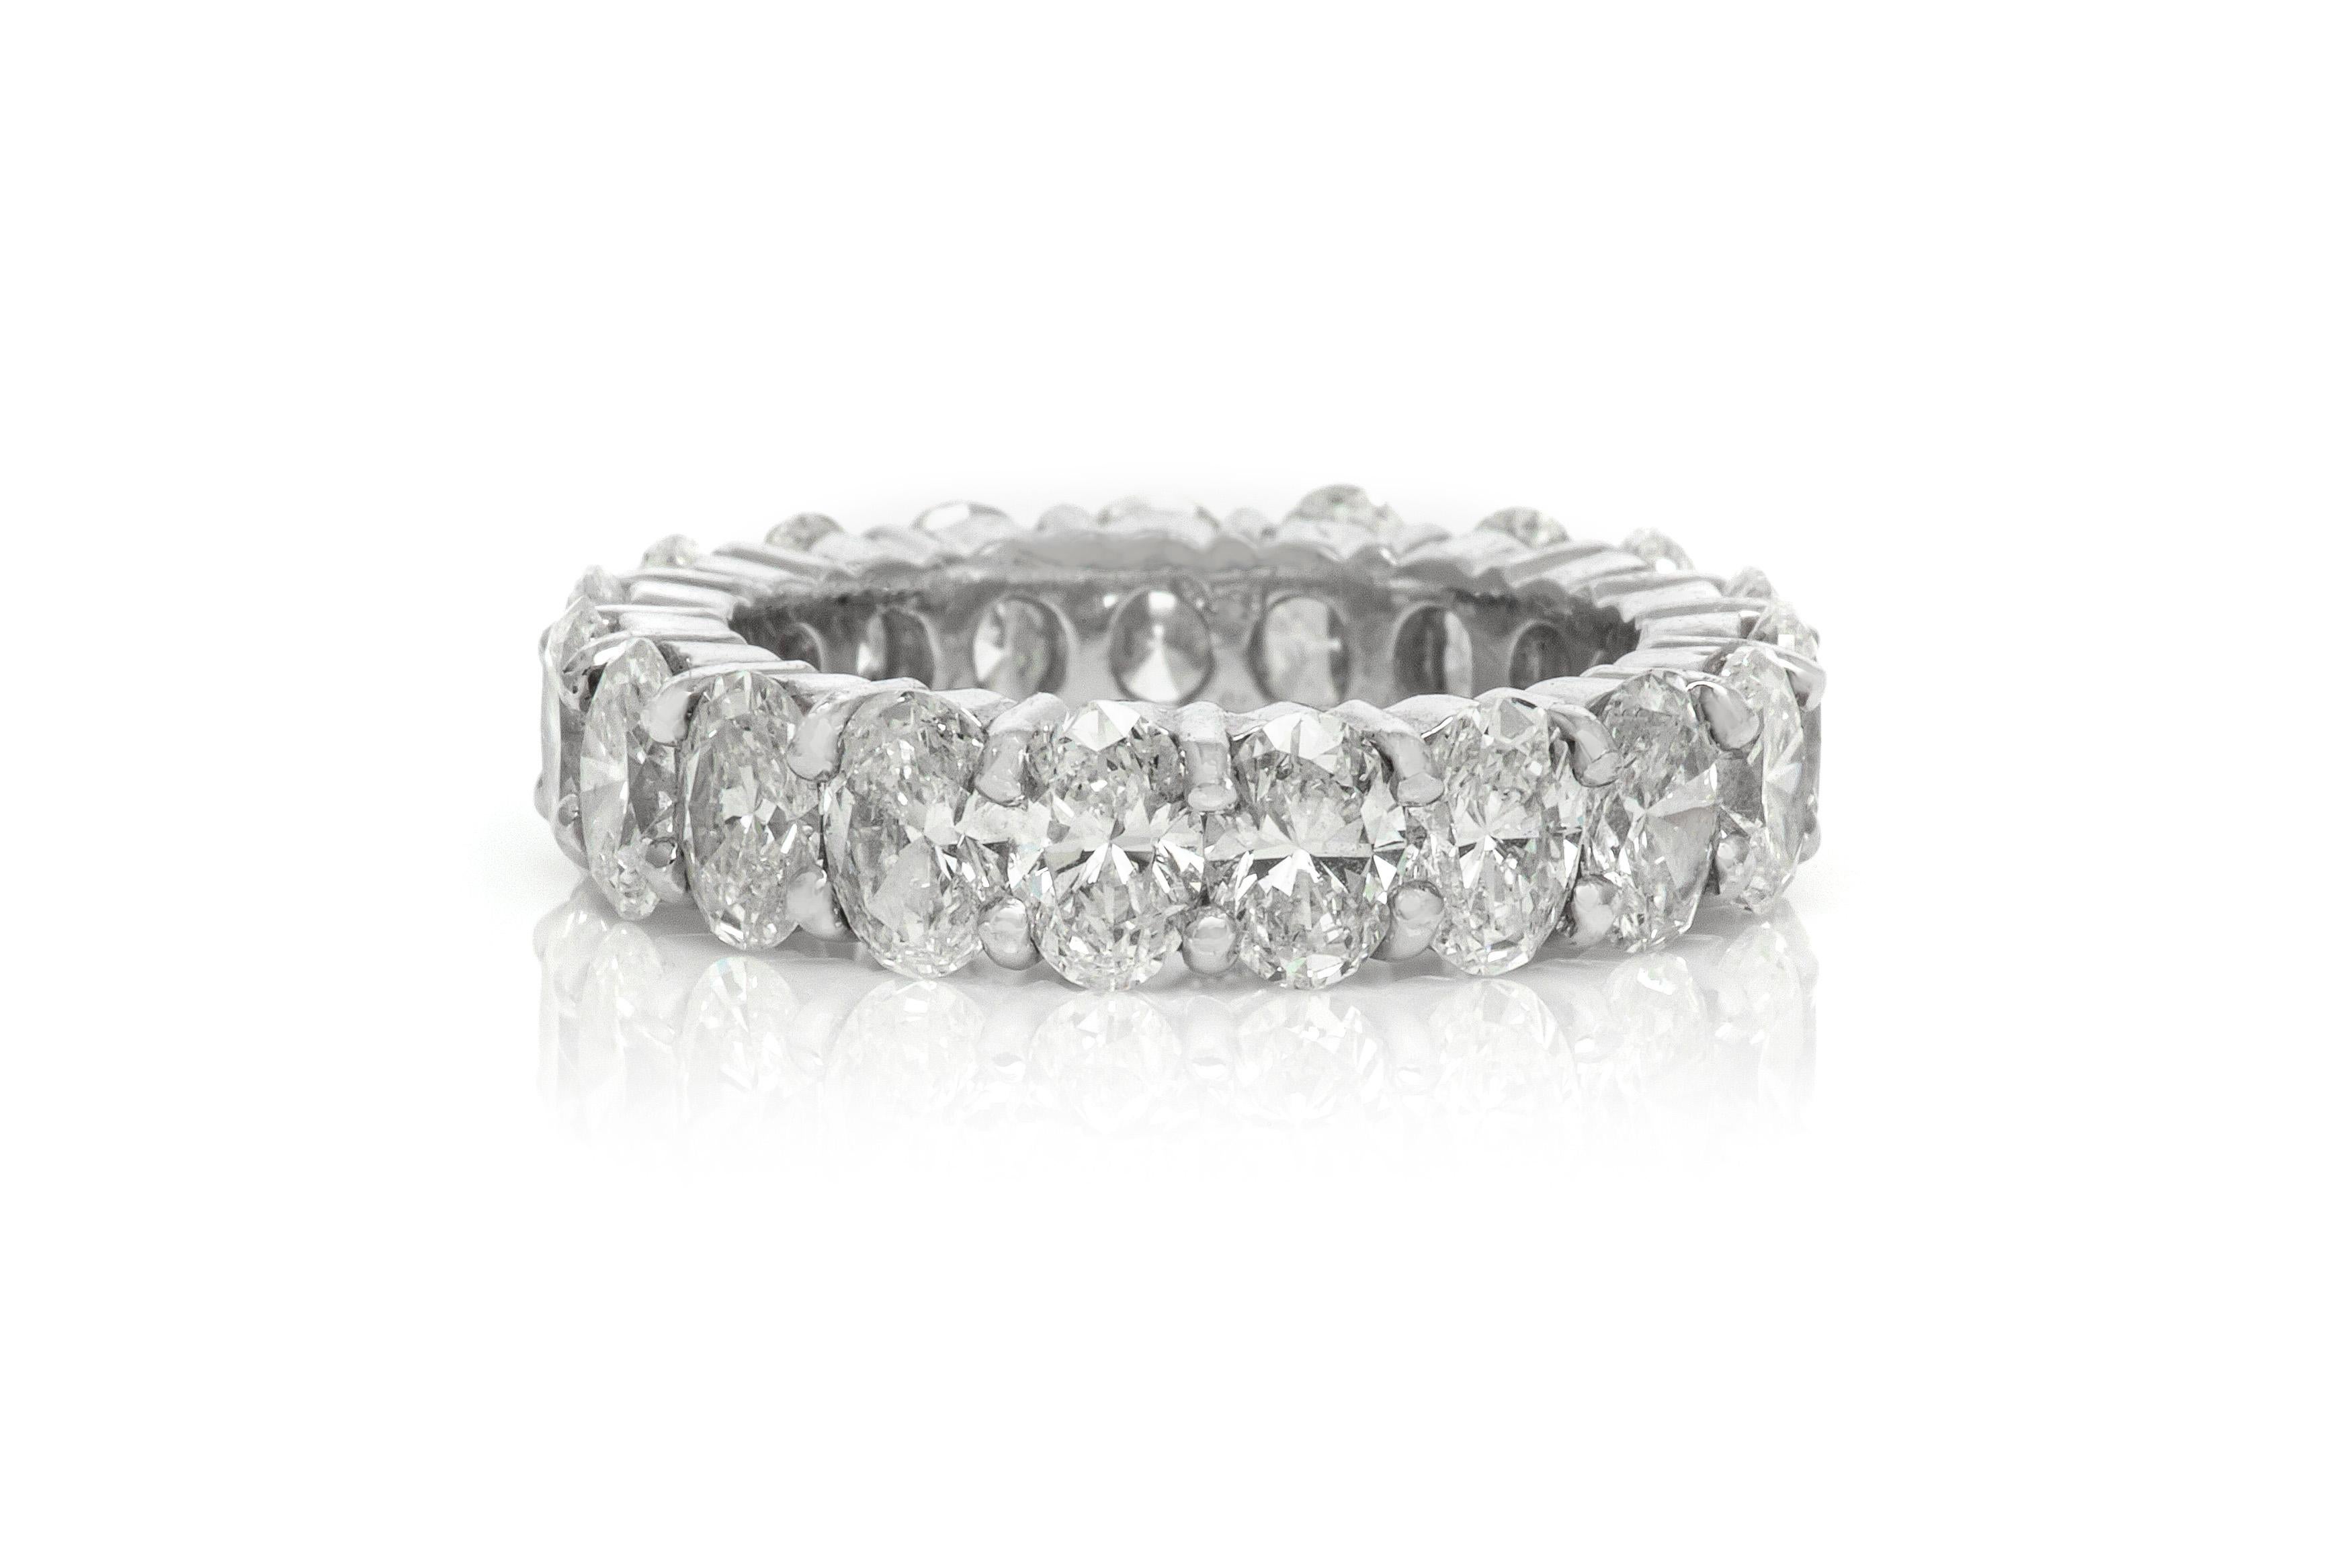 Finely crafted in platinum with 19 Oval cut diamonds weighing a total of 6.58 carats.
Size 6 1/2.